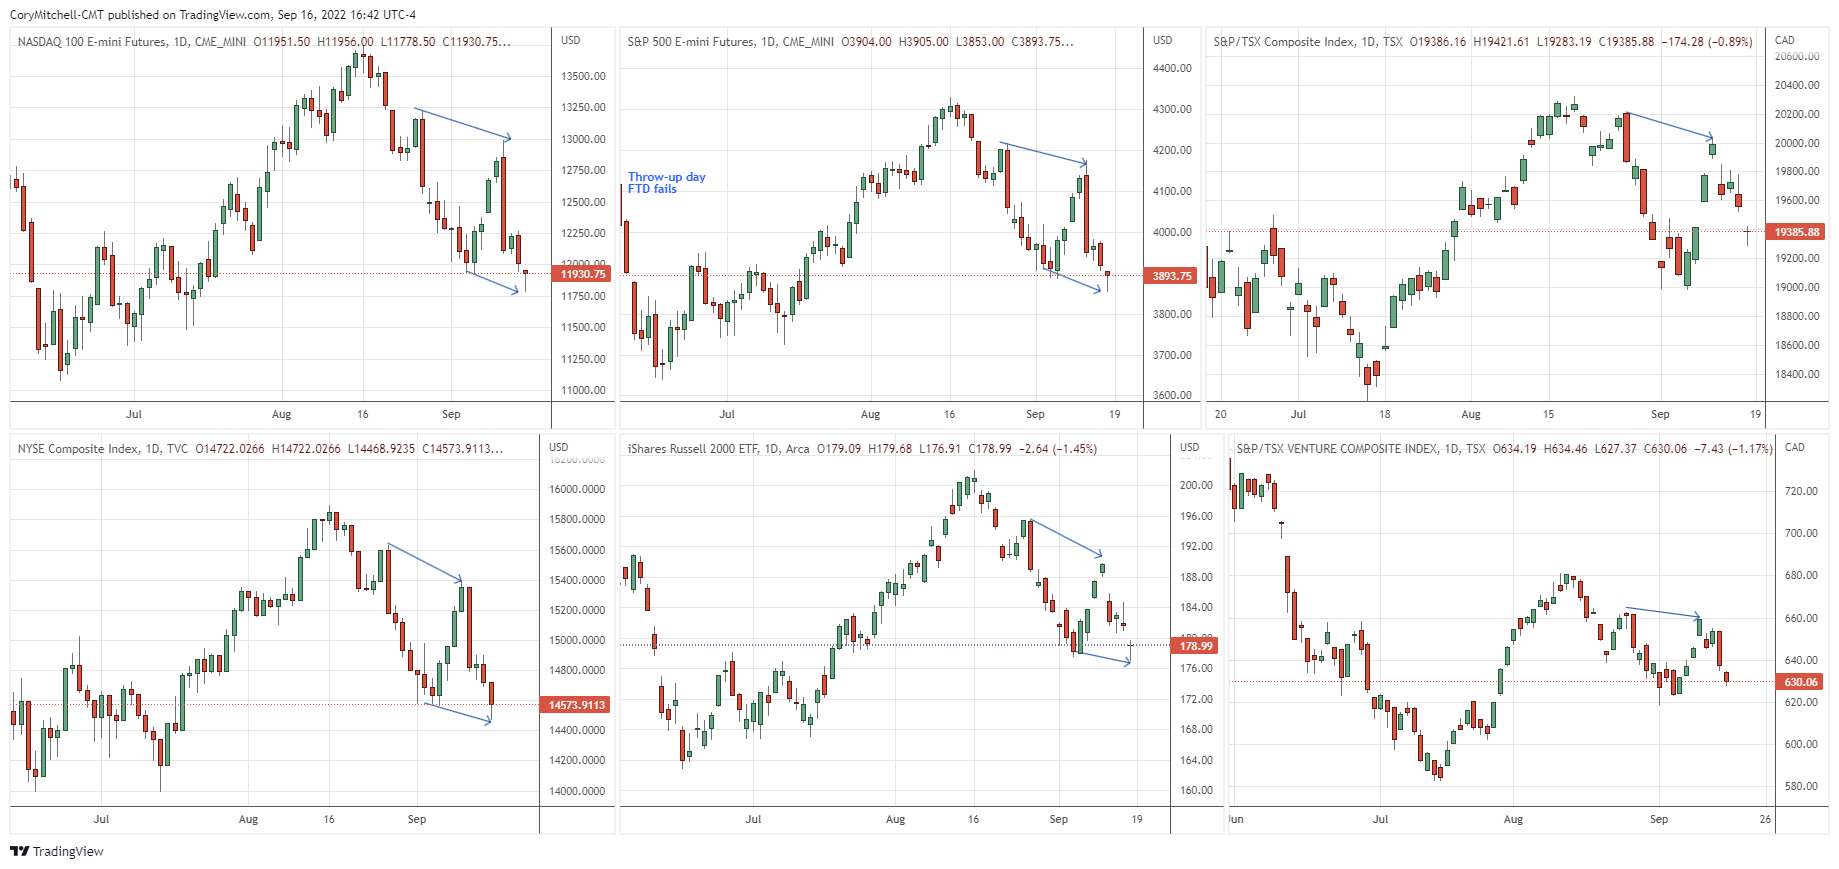 US and Canadian indices over the past couple months, as of Sept 16 2022